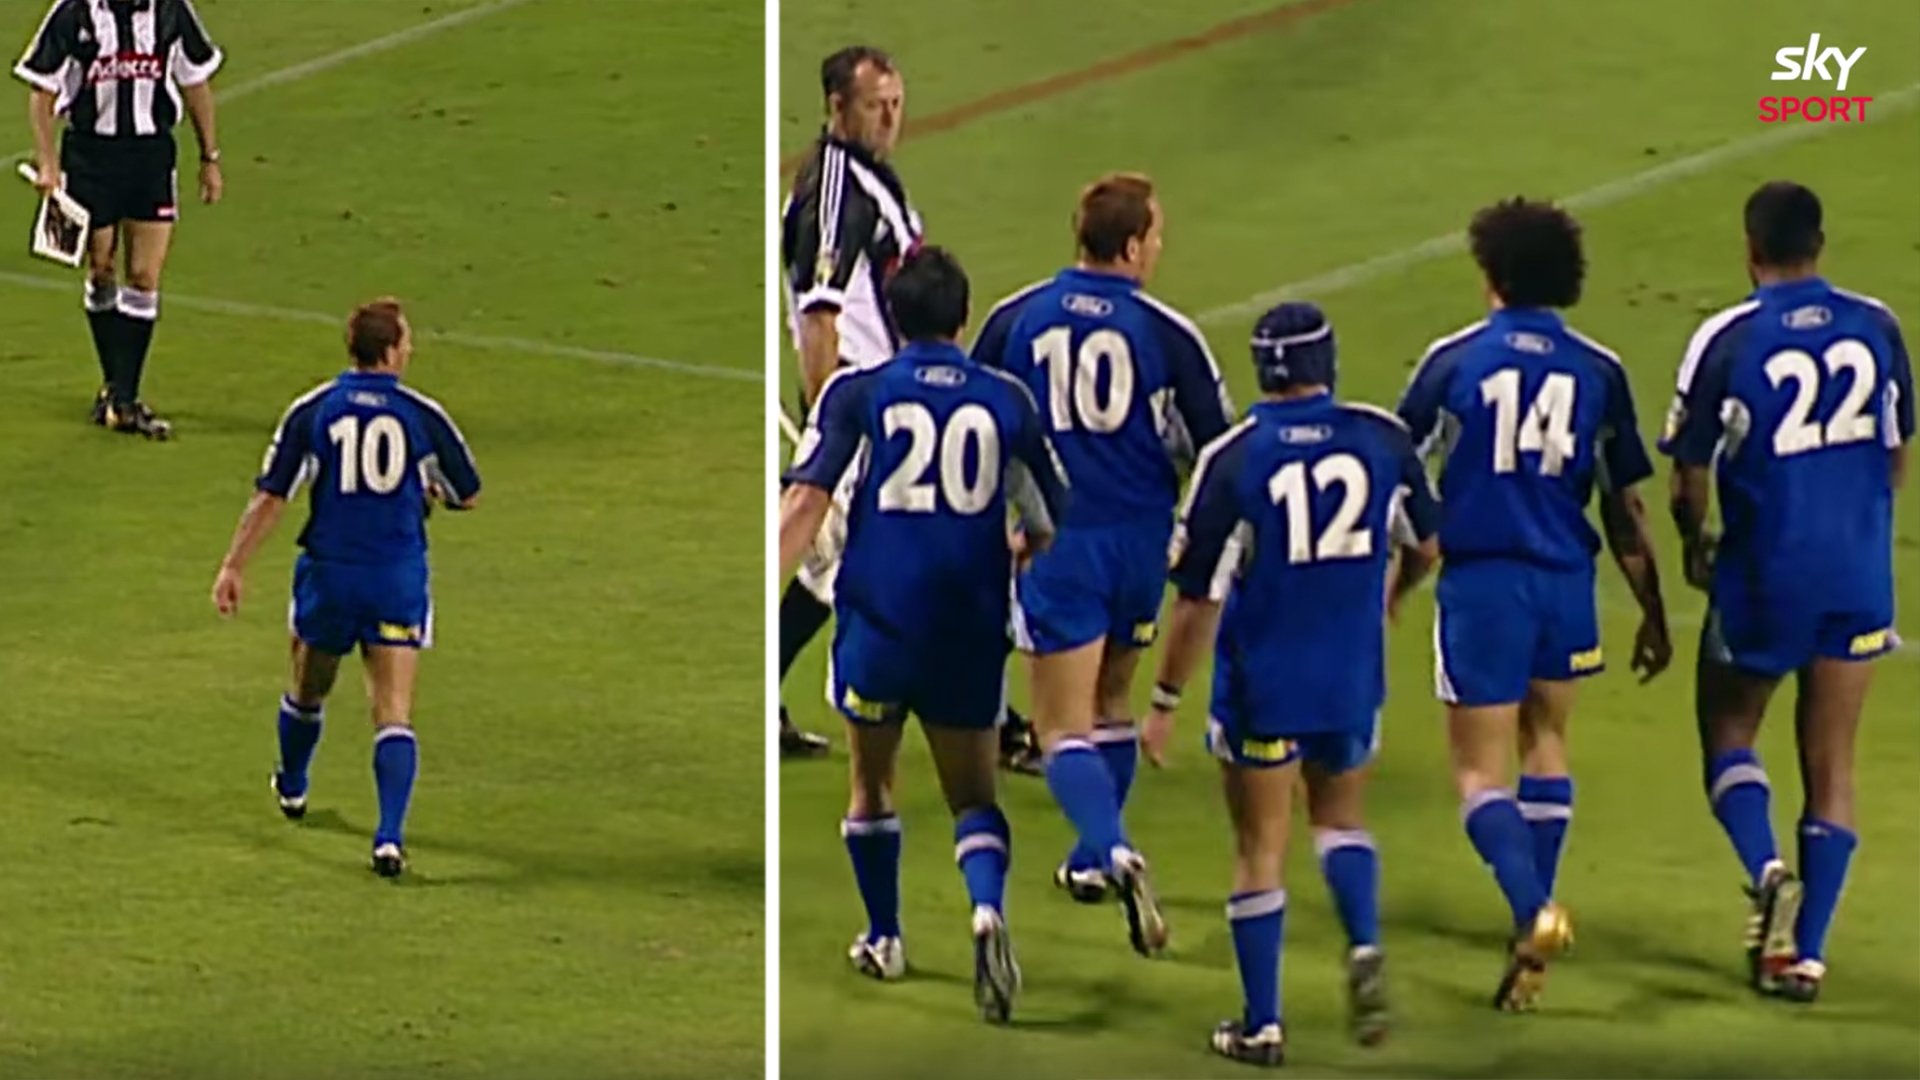 The time when Carlos Spencer and his team utterly humiliated the Crusaders